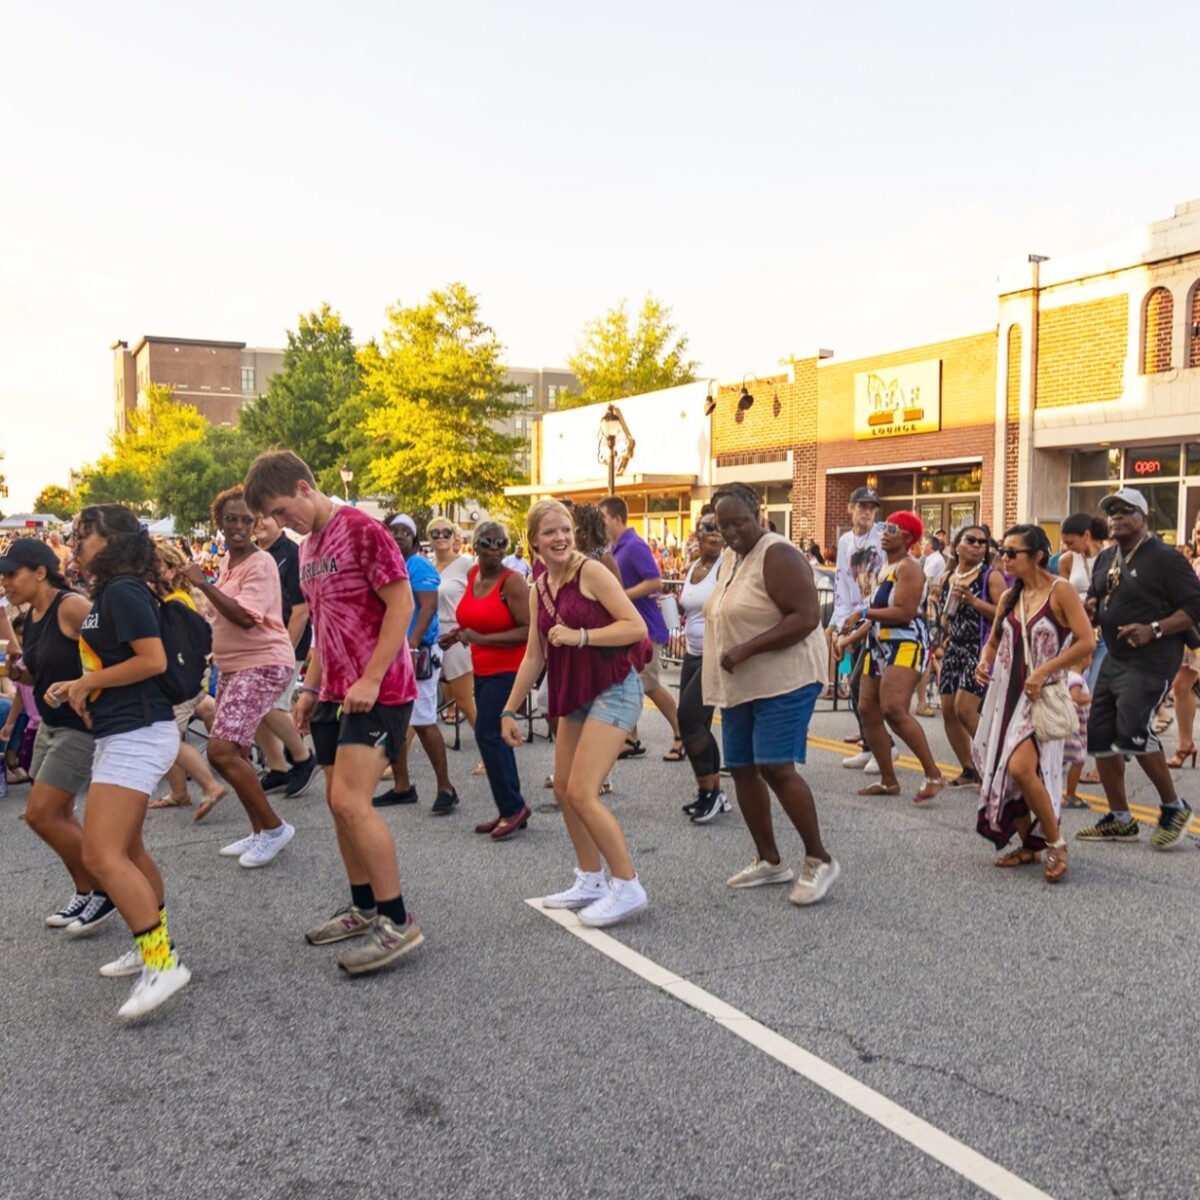 People dancing in the street in Florence, South Carolina.